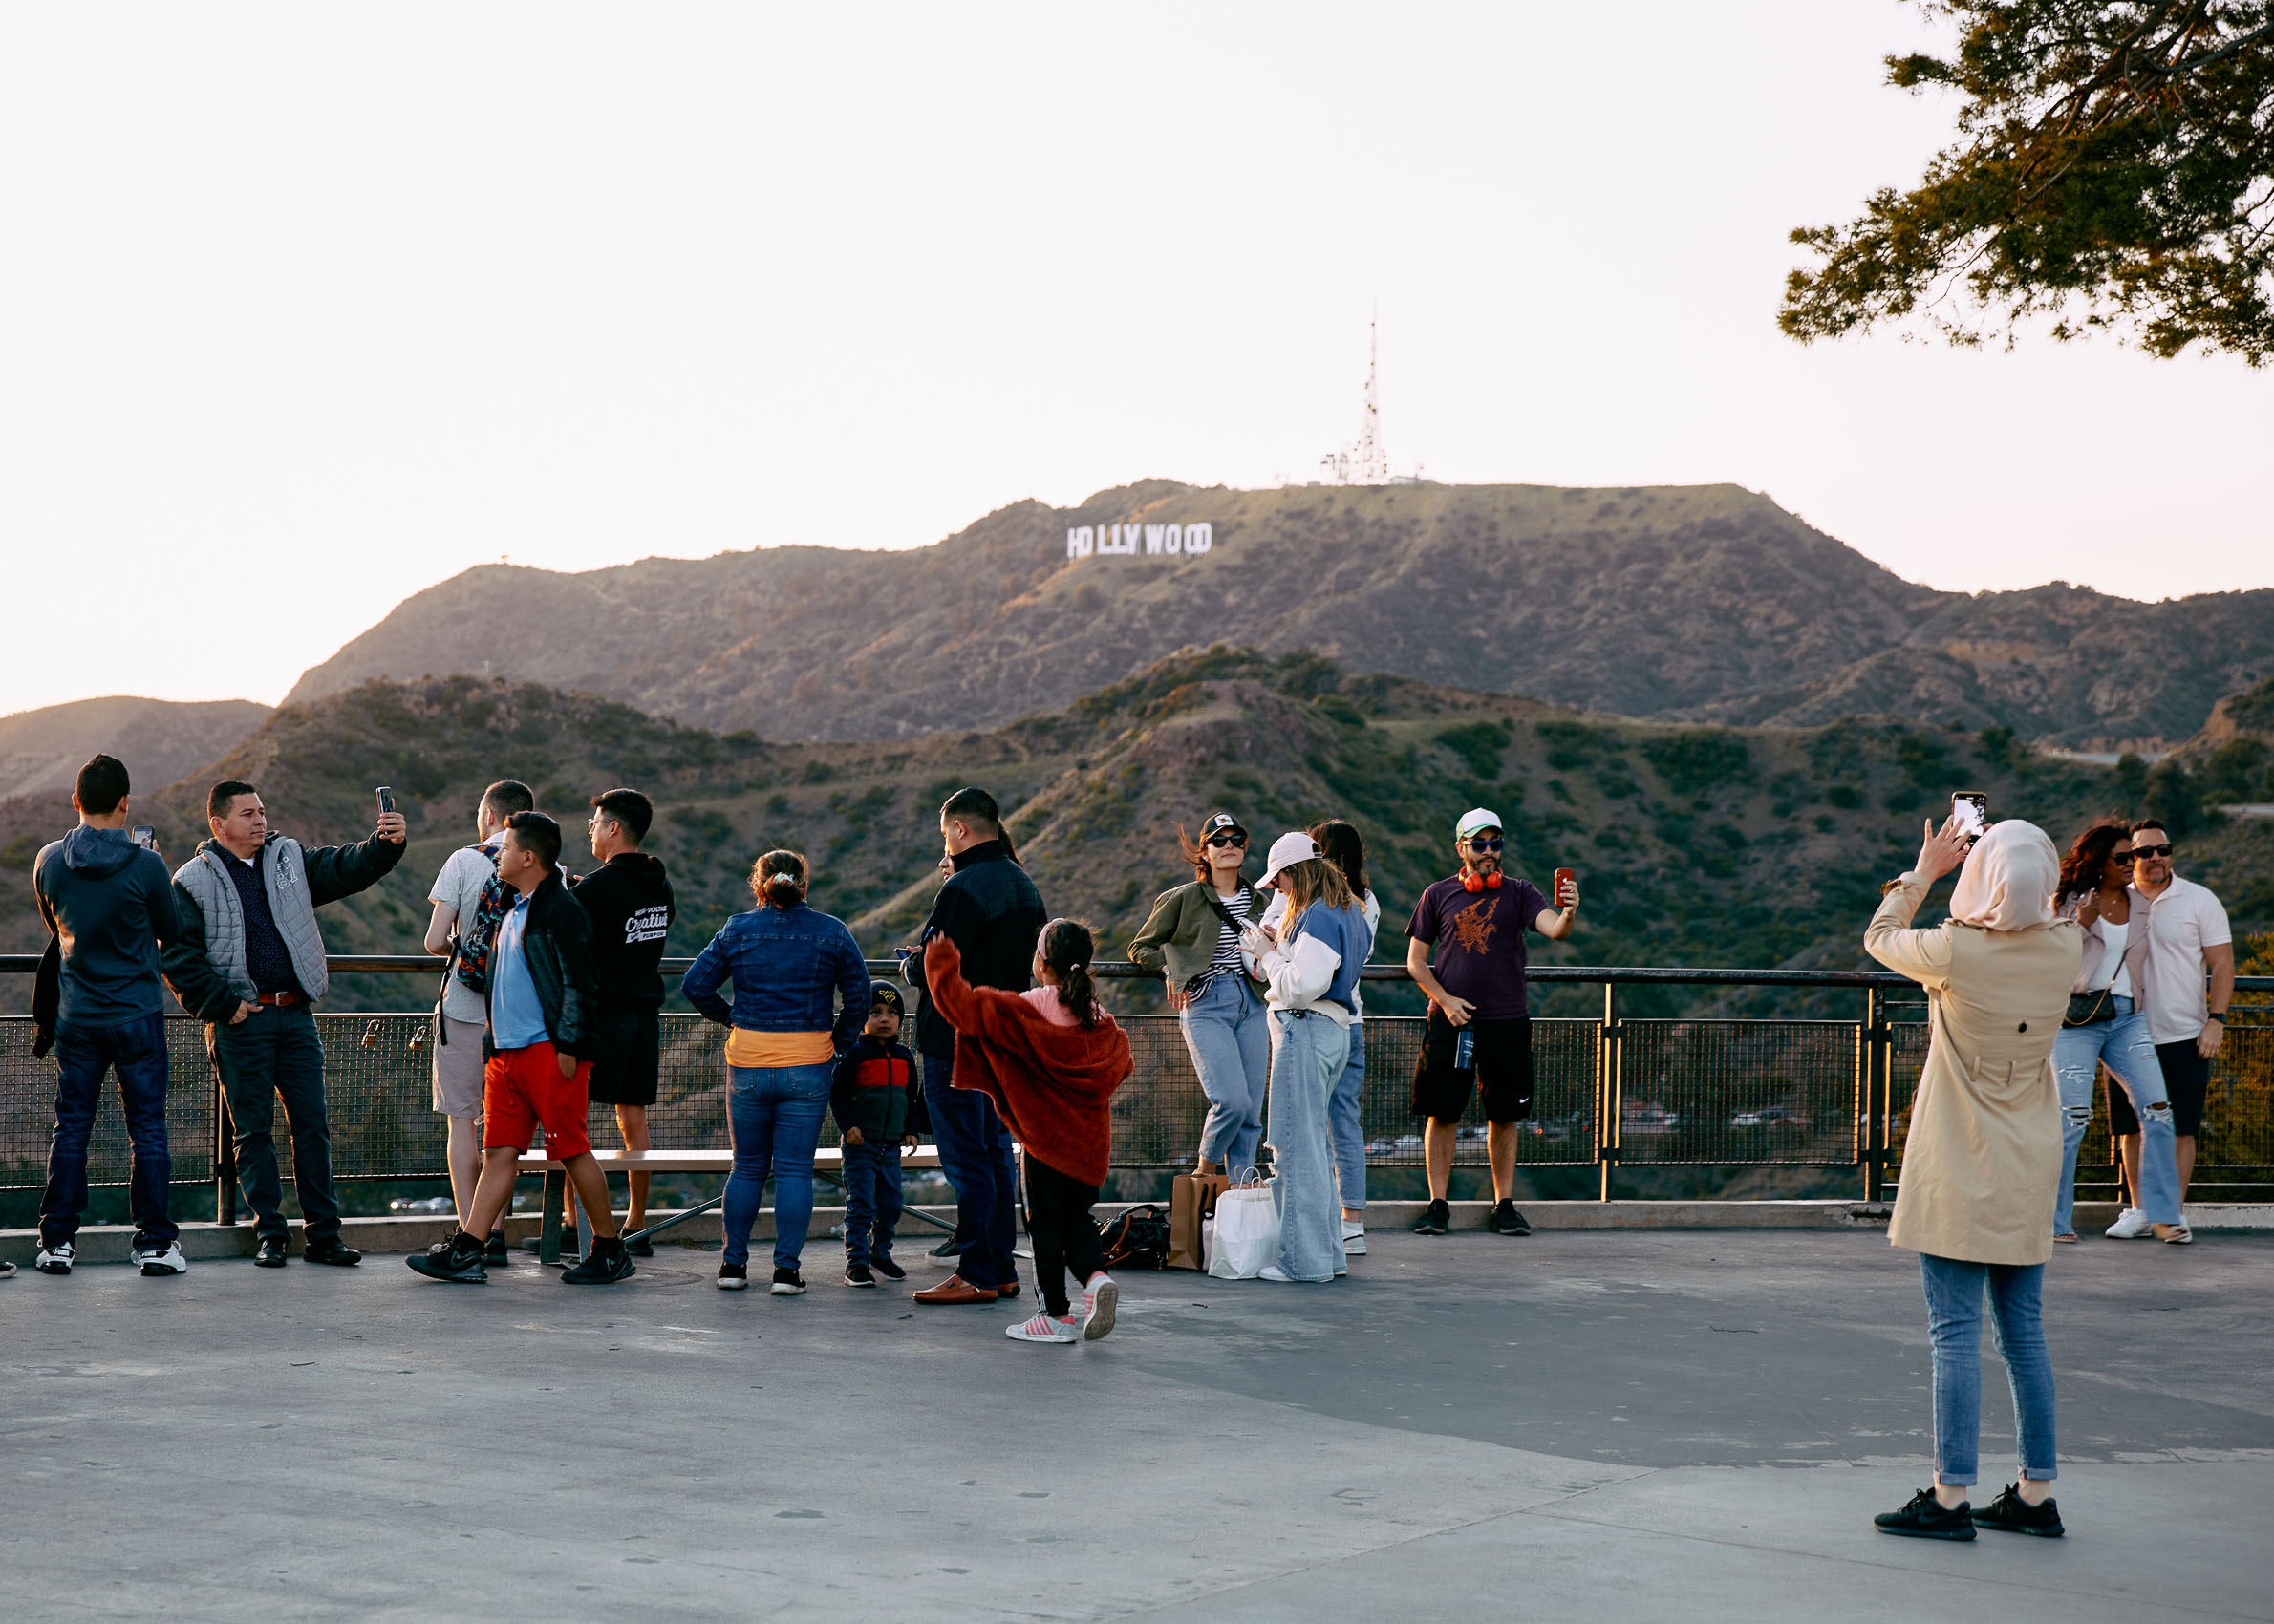 Tourists taking pictures of the Hollywood sign | Los Angeles | Editorial and Commercial Photographer Patrick Strattner